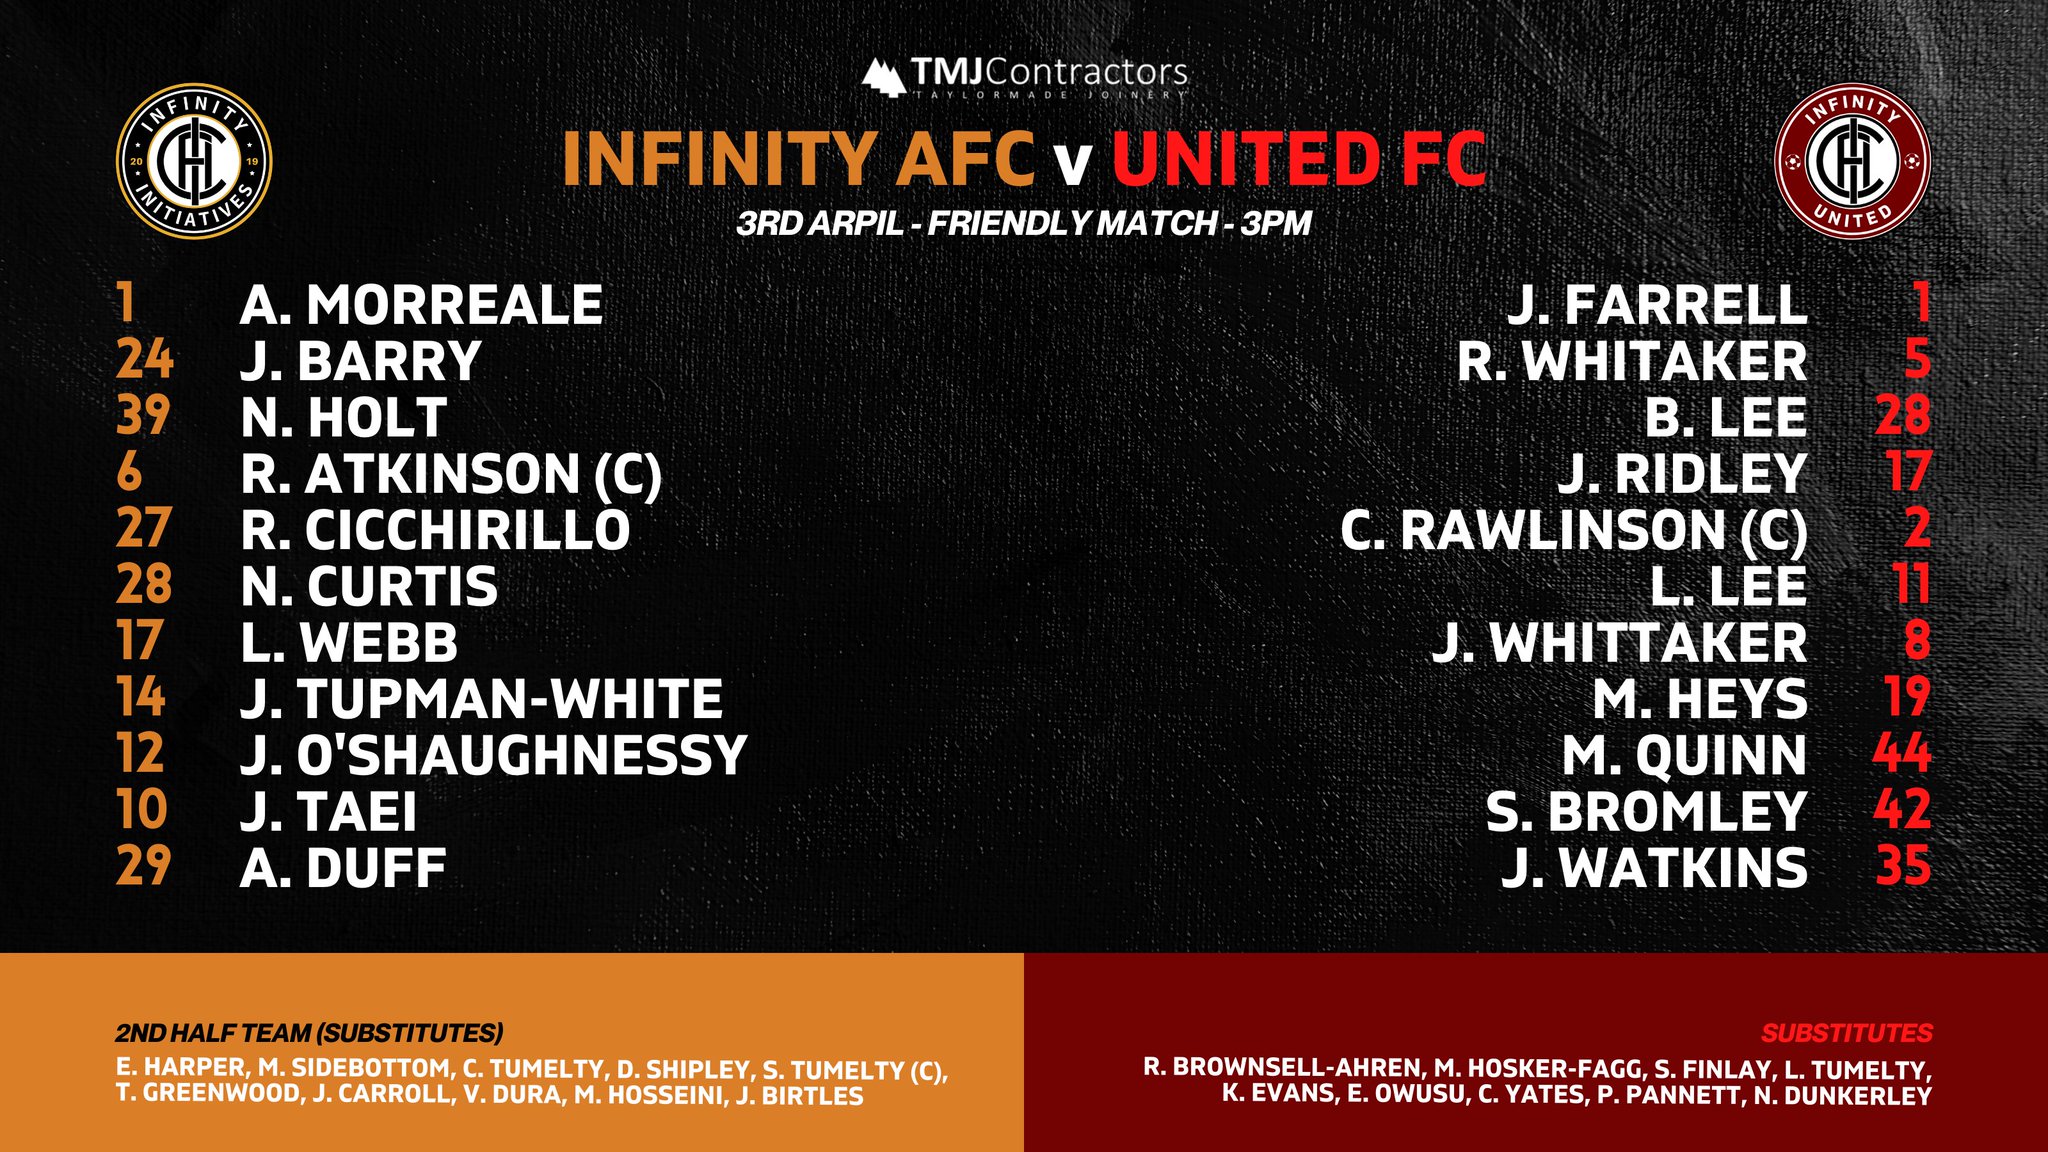 Infinity Initiatives Fc Here Is Your Team Sheet For Tomorrow Afternoons Match Between Infinity Afc And Infinity United Fc Which Team Will Prevail Iifc Theinfinityway T Co Dbsncfswv4